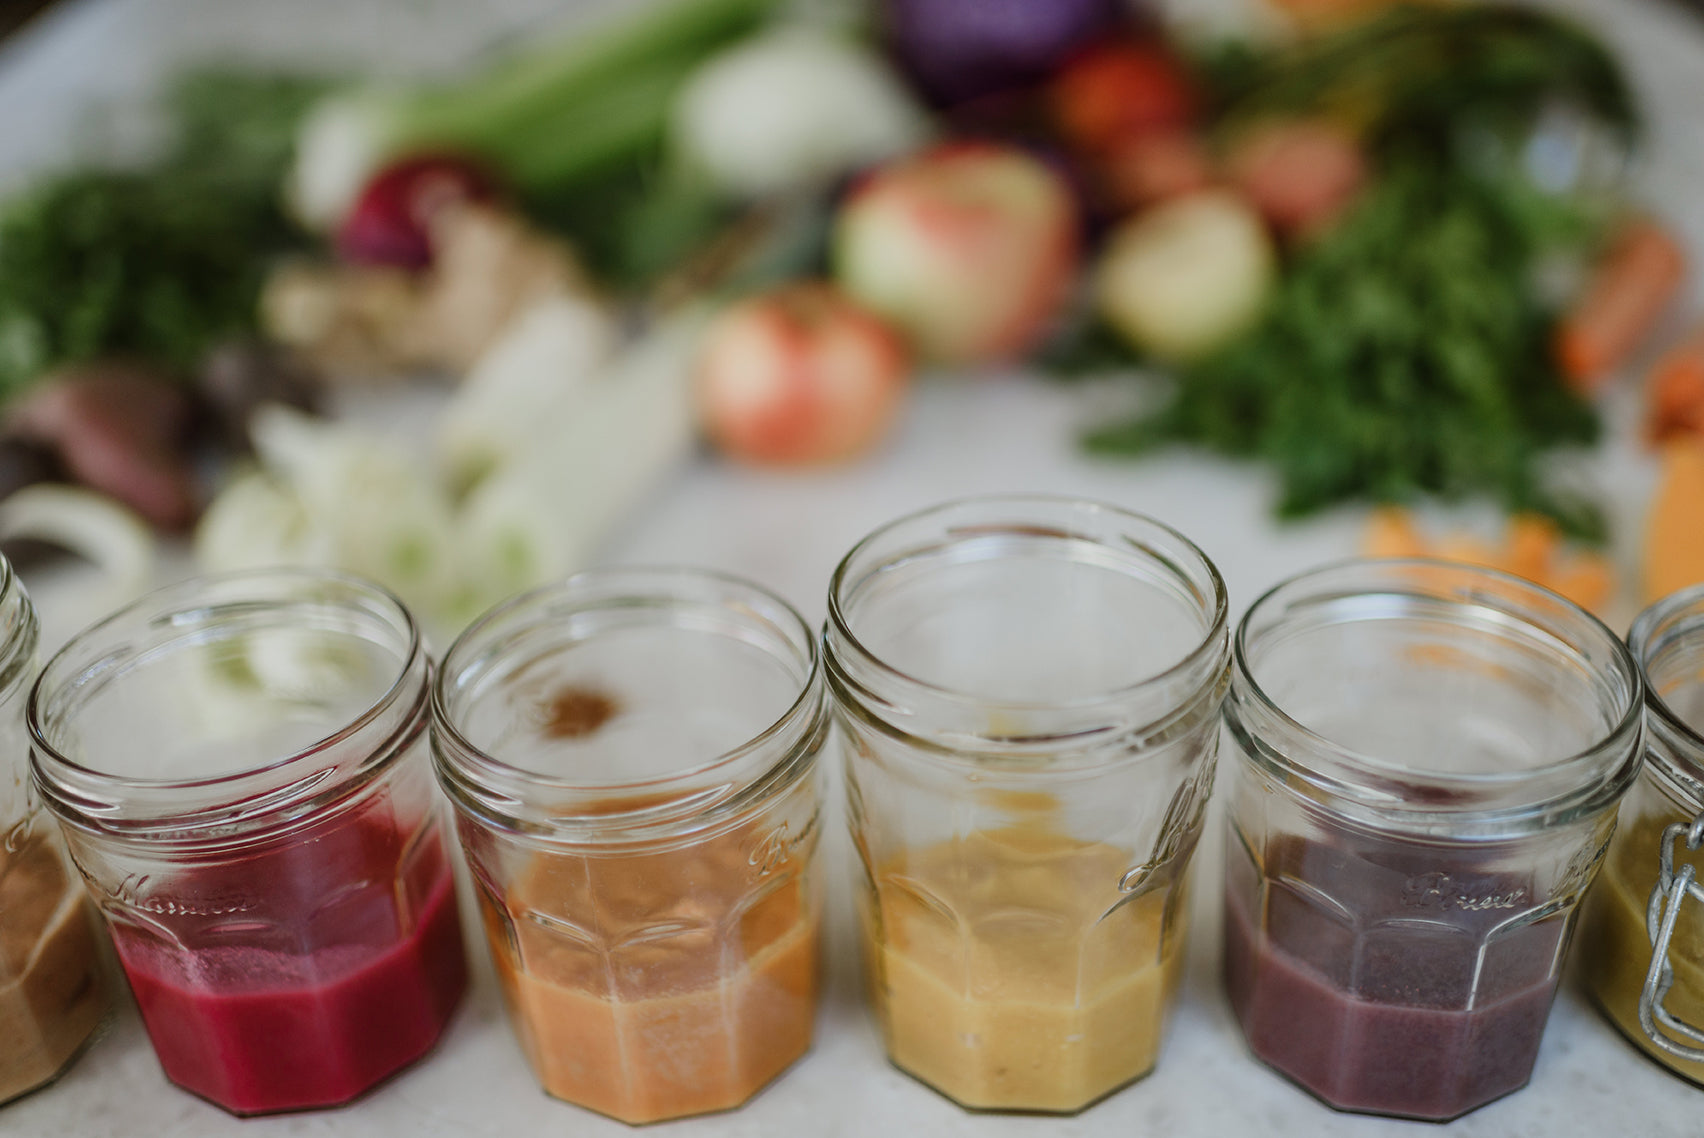 An assortment of baby food jars, each with different vibrant colors indicating various fruit and vegetable purees, arranged in a semi-circle on a white background.